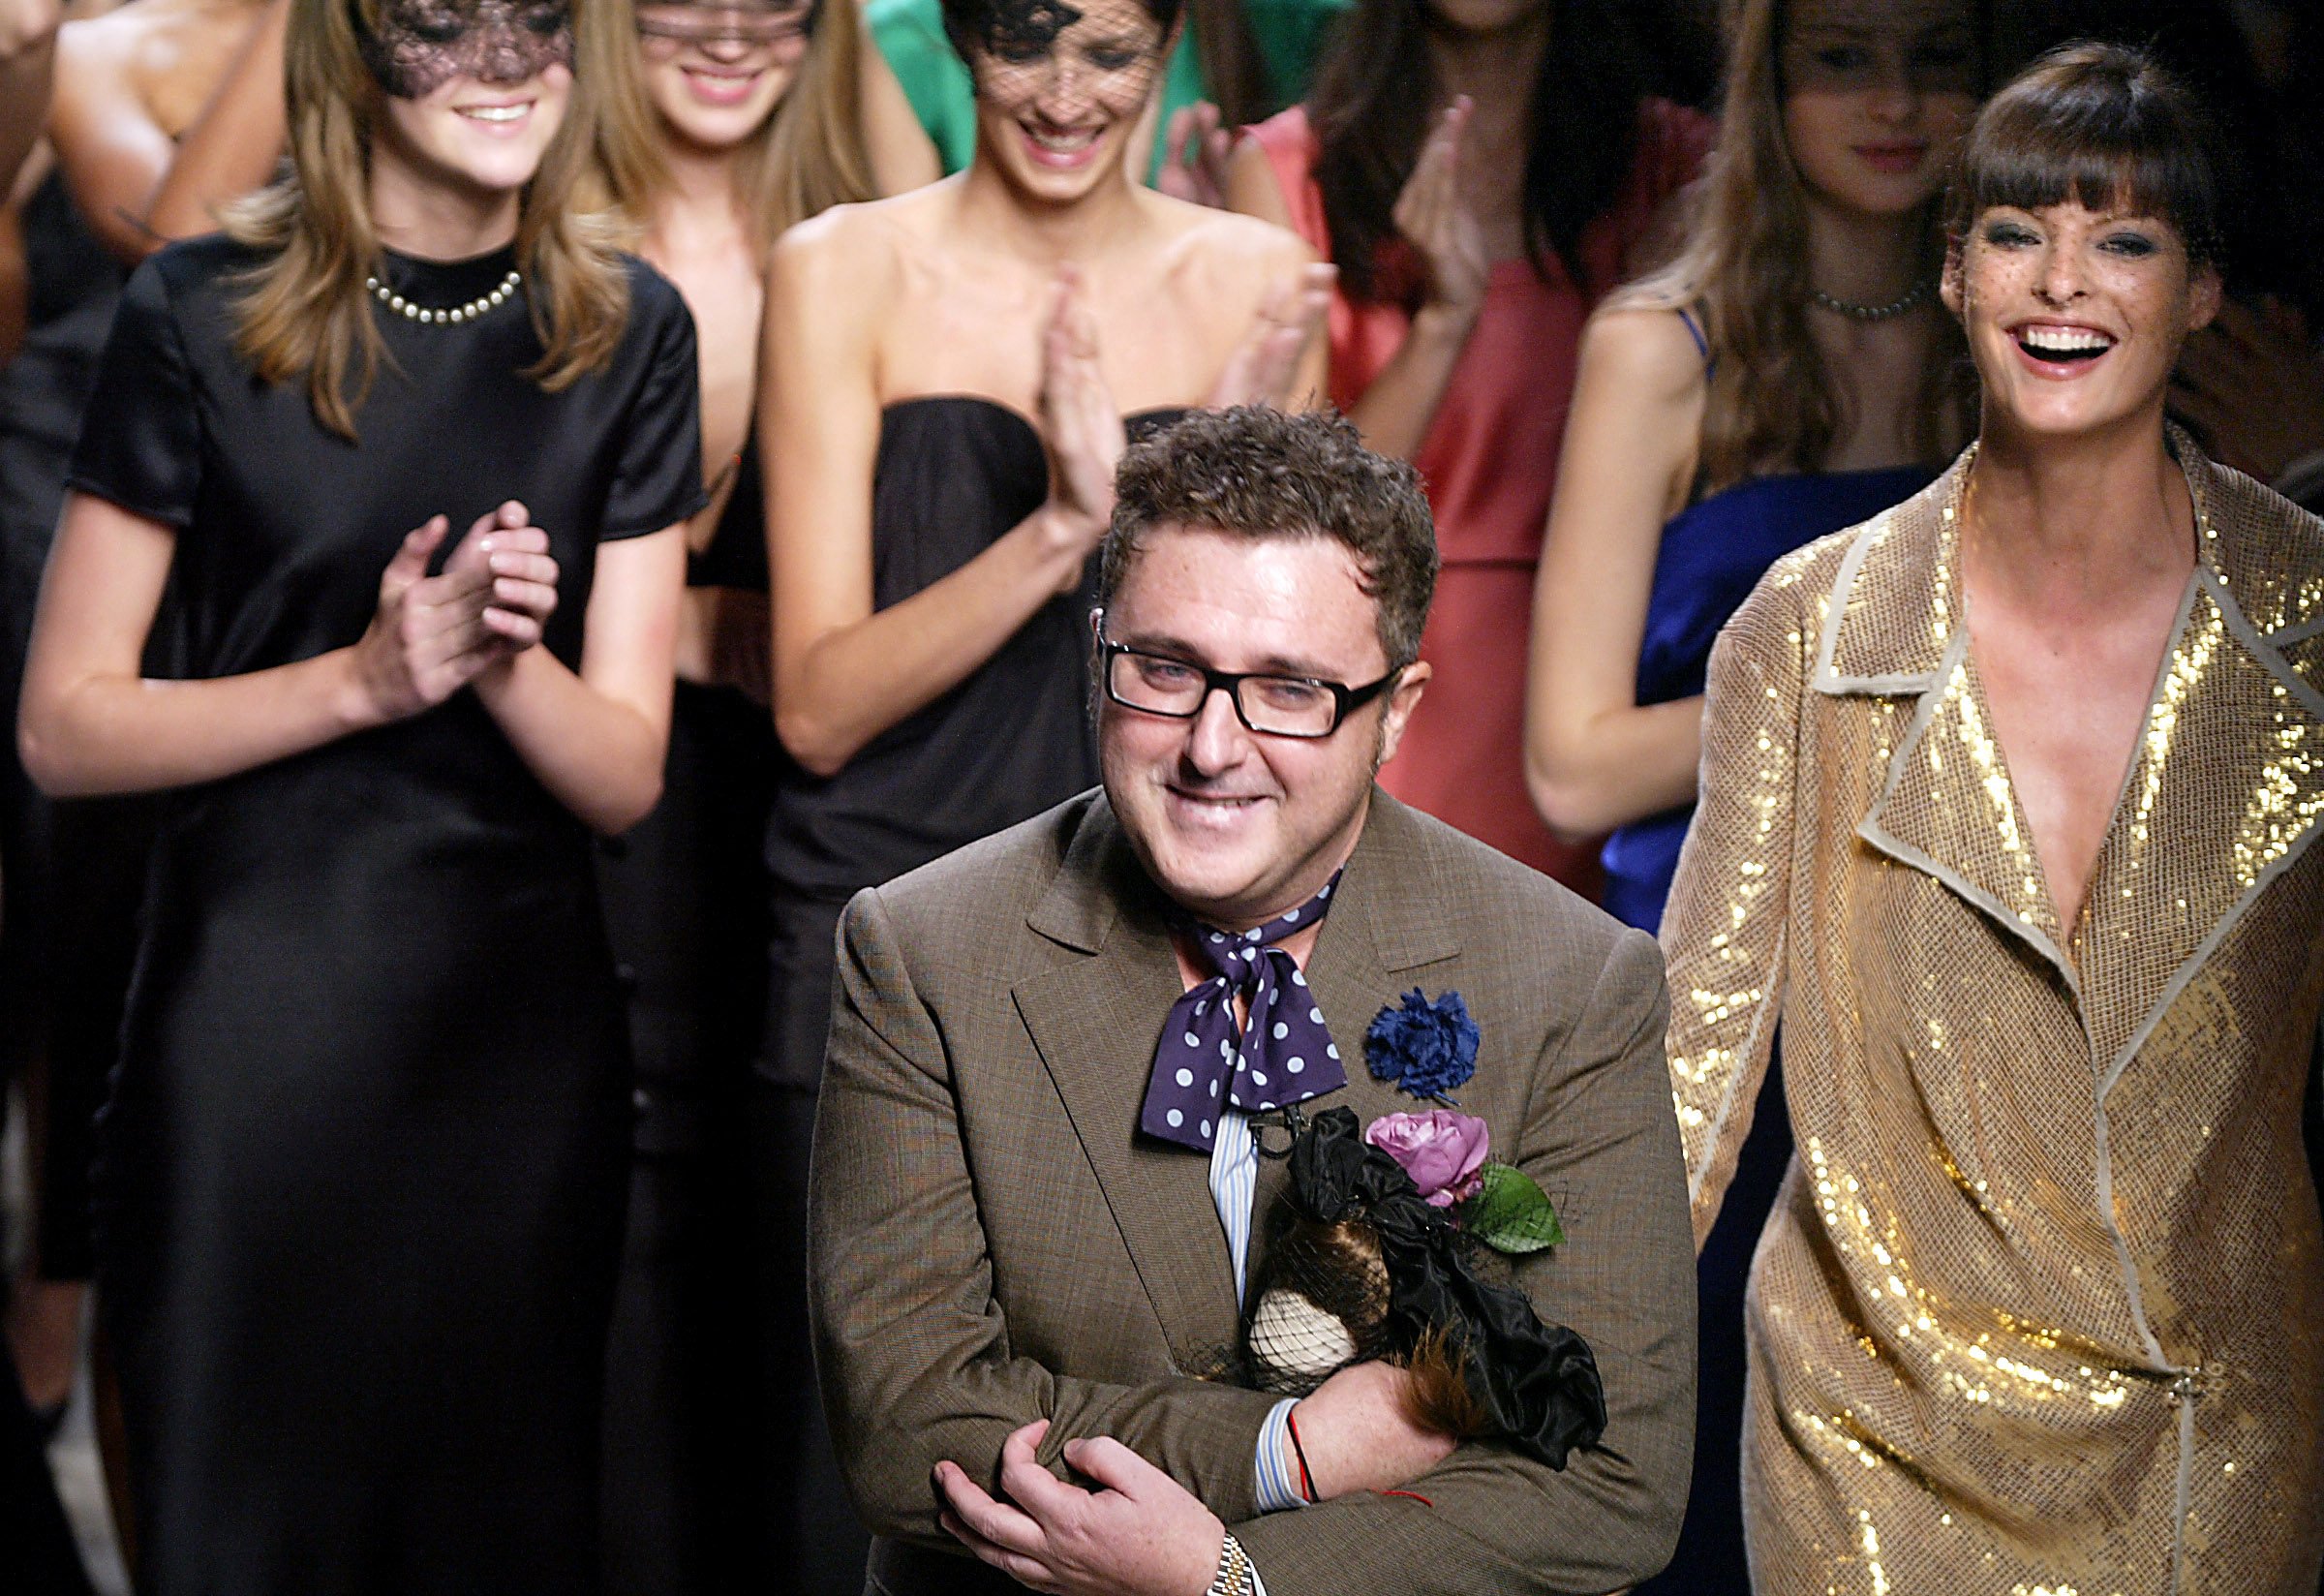 Designer Alber Elbaz after his show for Lanvin 12 in Paris during the ready-to-wear spring/summer 2004 collections in October 2003. Elbaz has died aged 59, the Richemont luxury group said on April 25, 2021. Photo: AFP